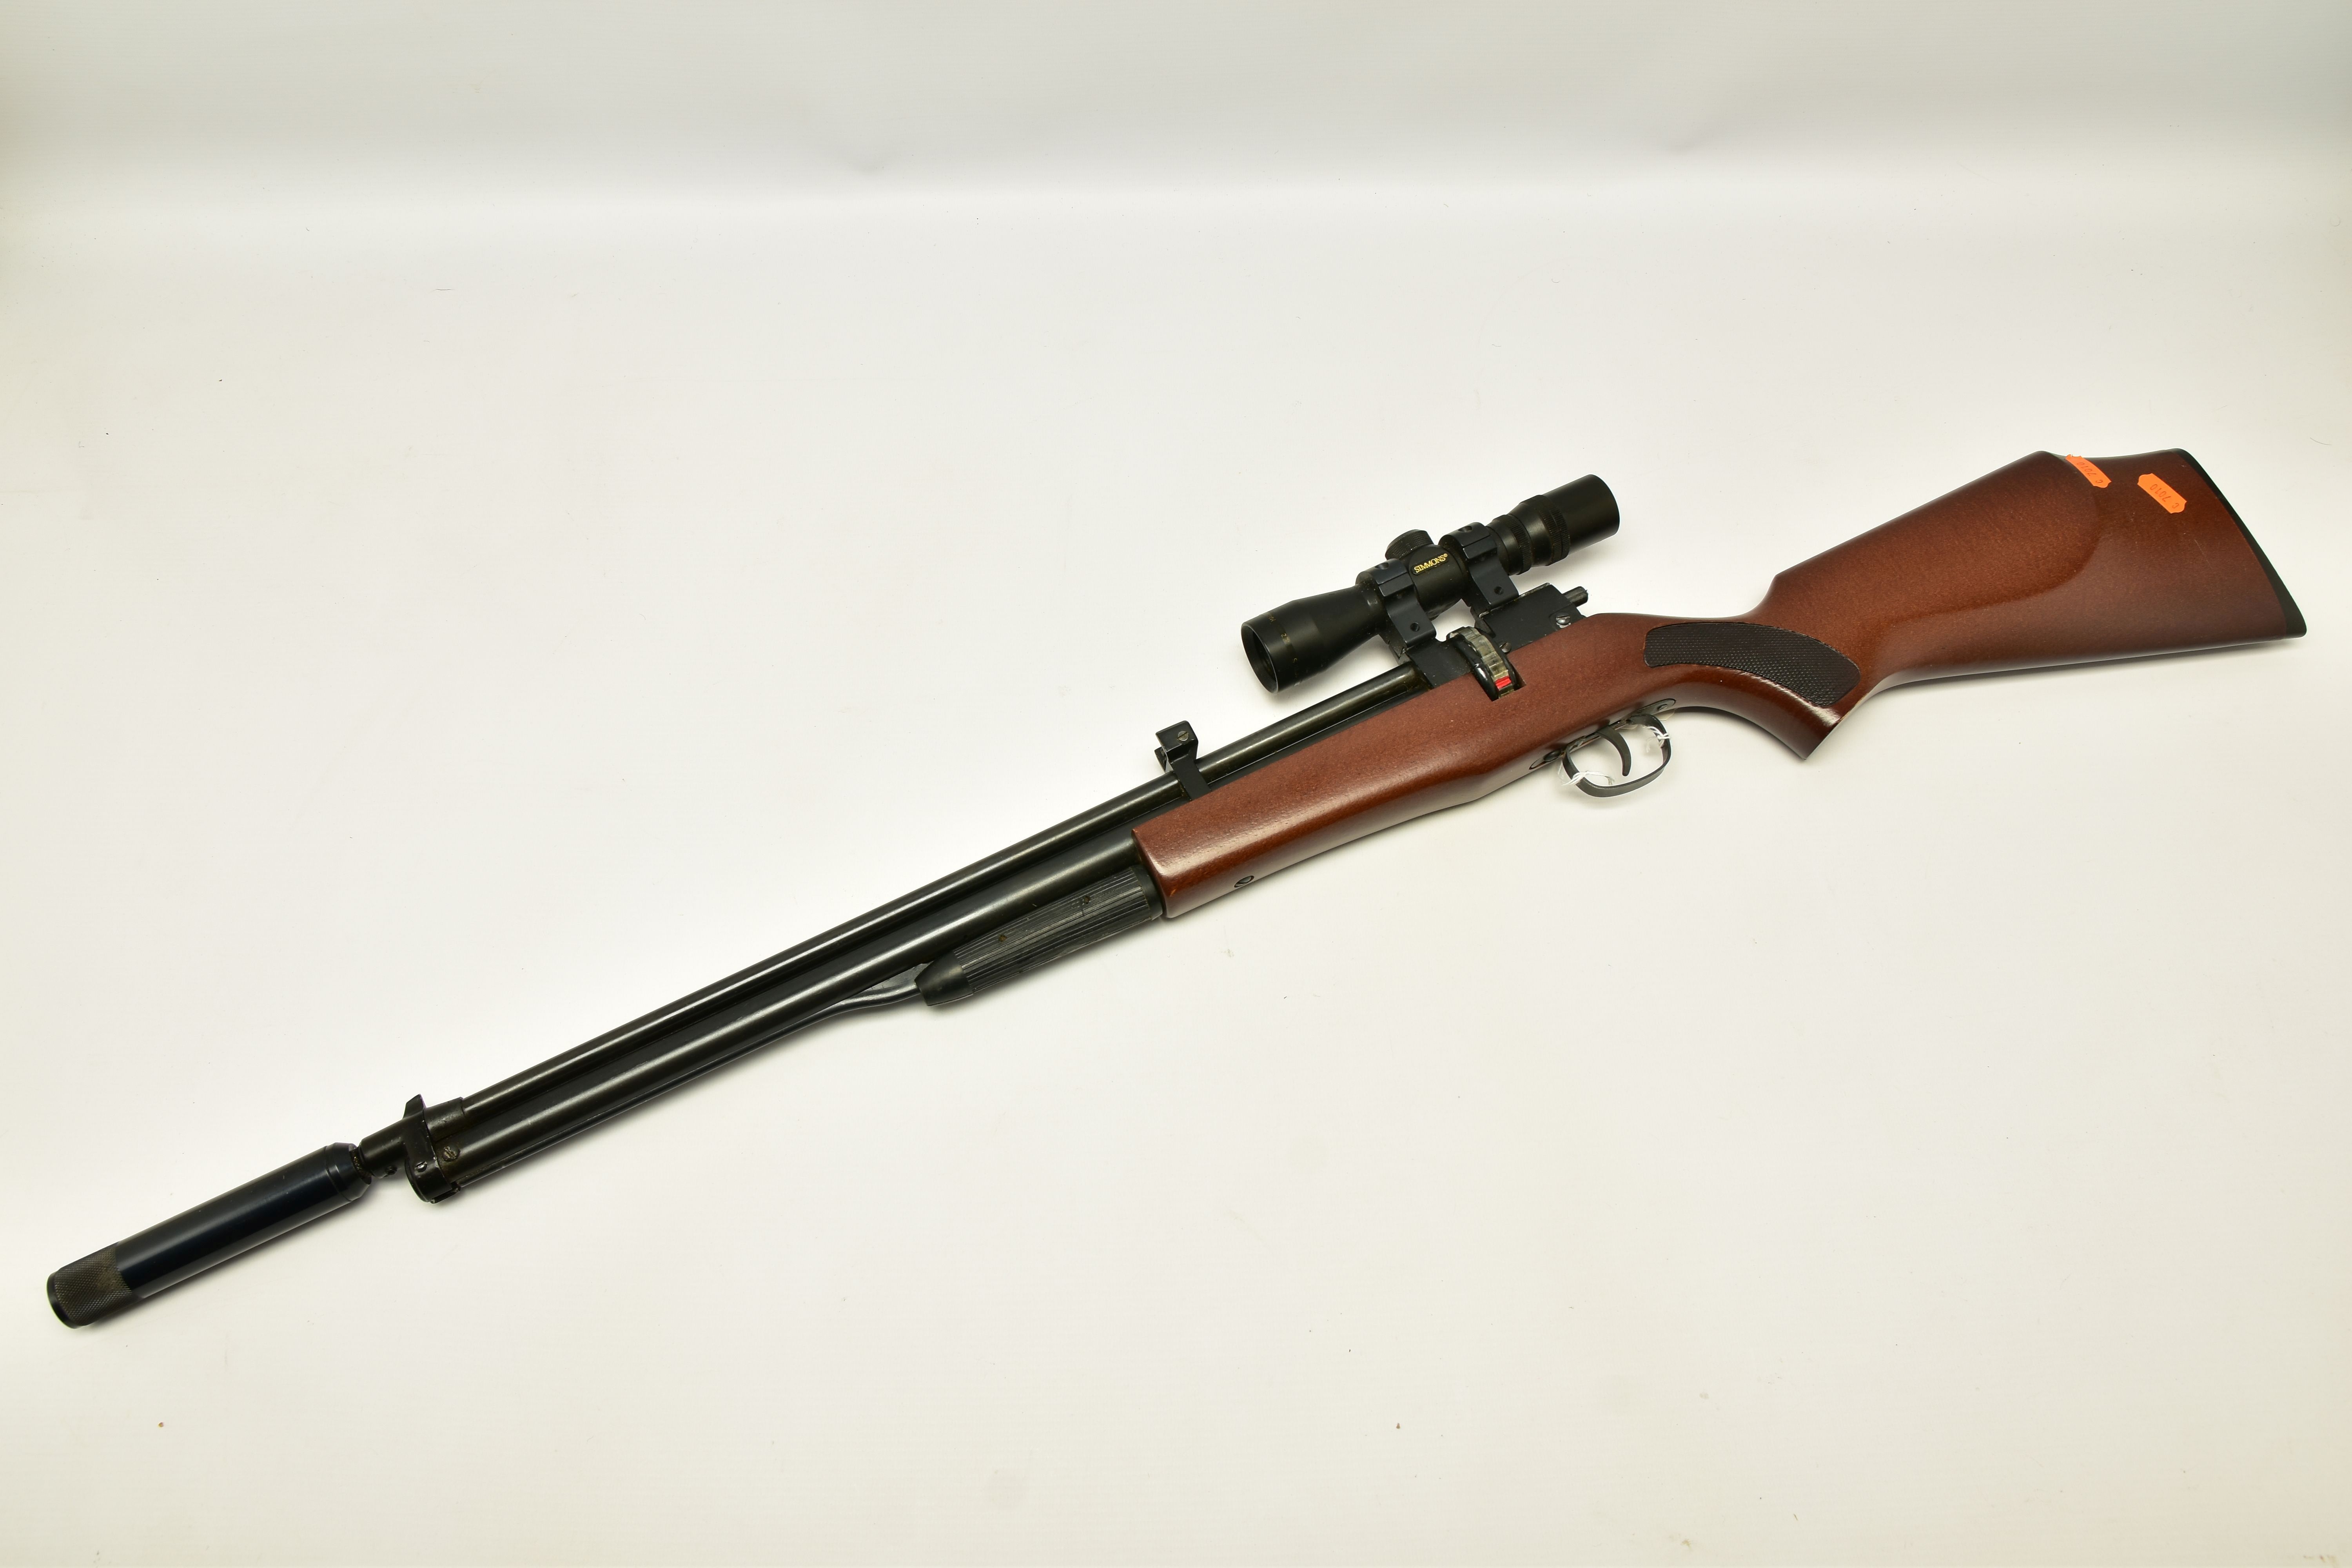 A .22 '' ROTARY MAGAZINE PUMP UP AIR RIFLE fitted with a beech stock, in working order and excellent - Image 6 of 9